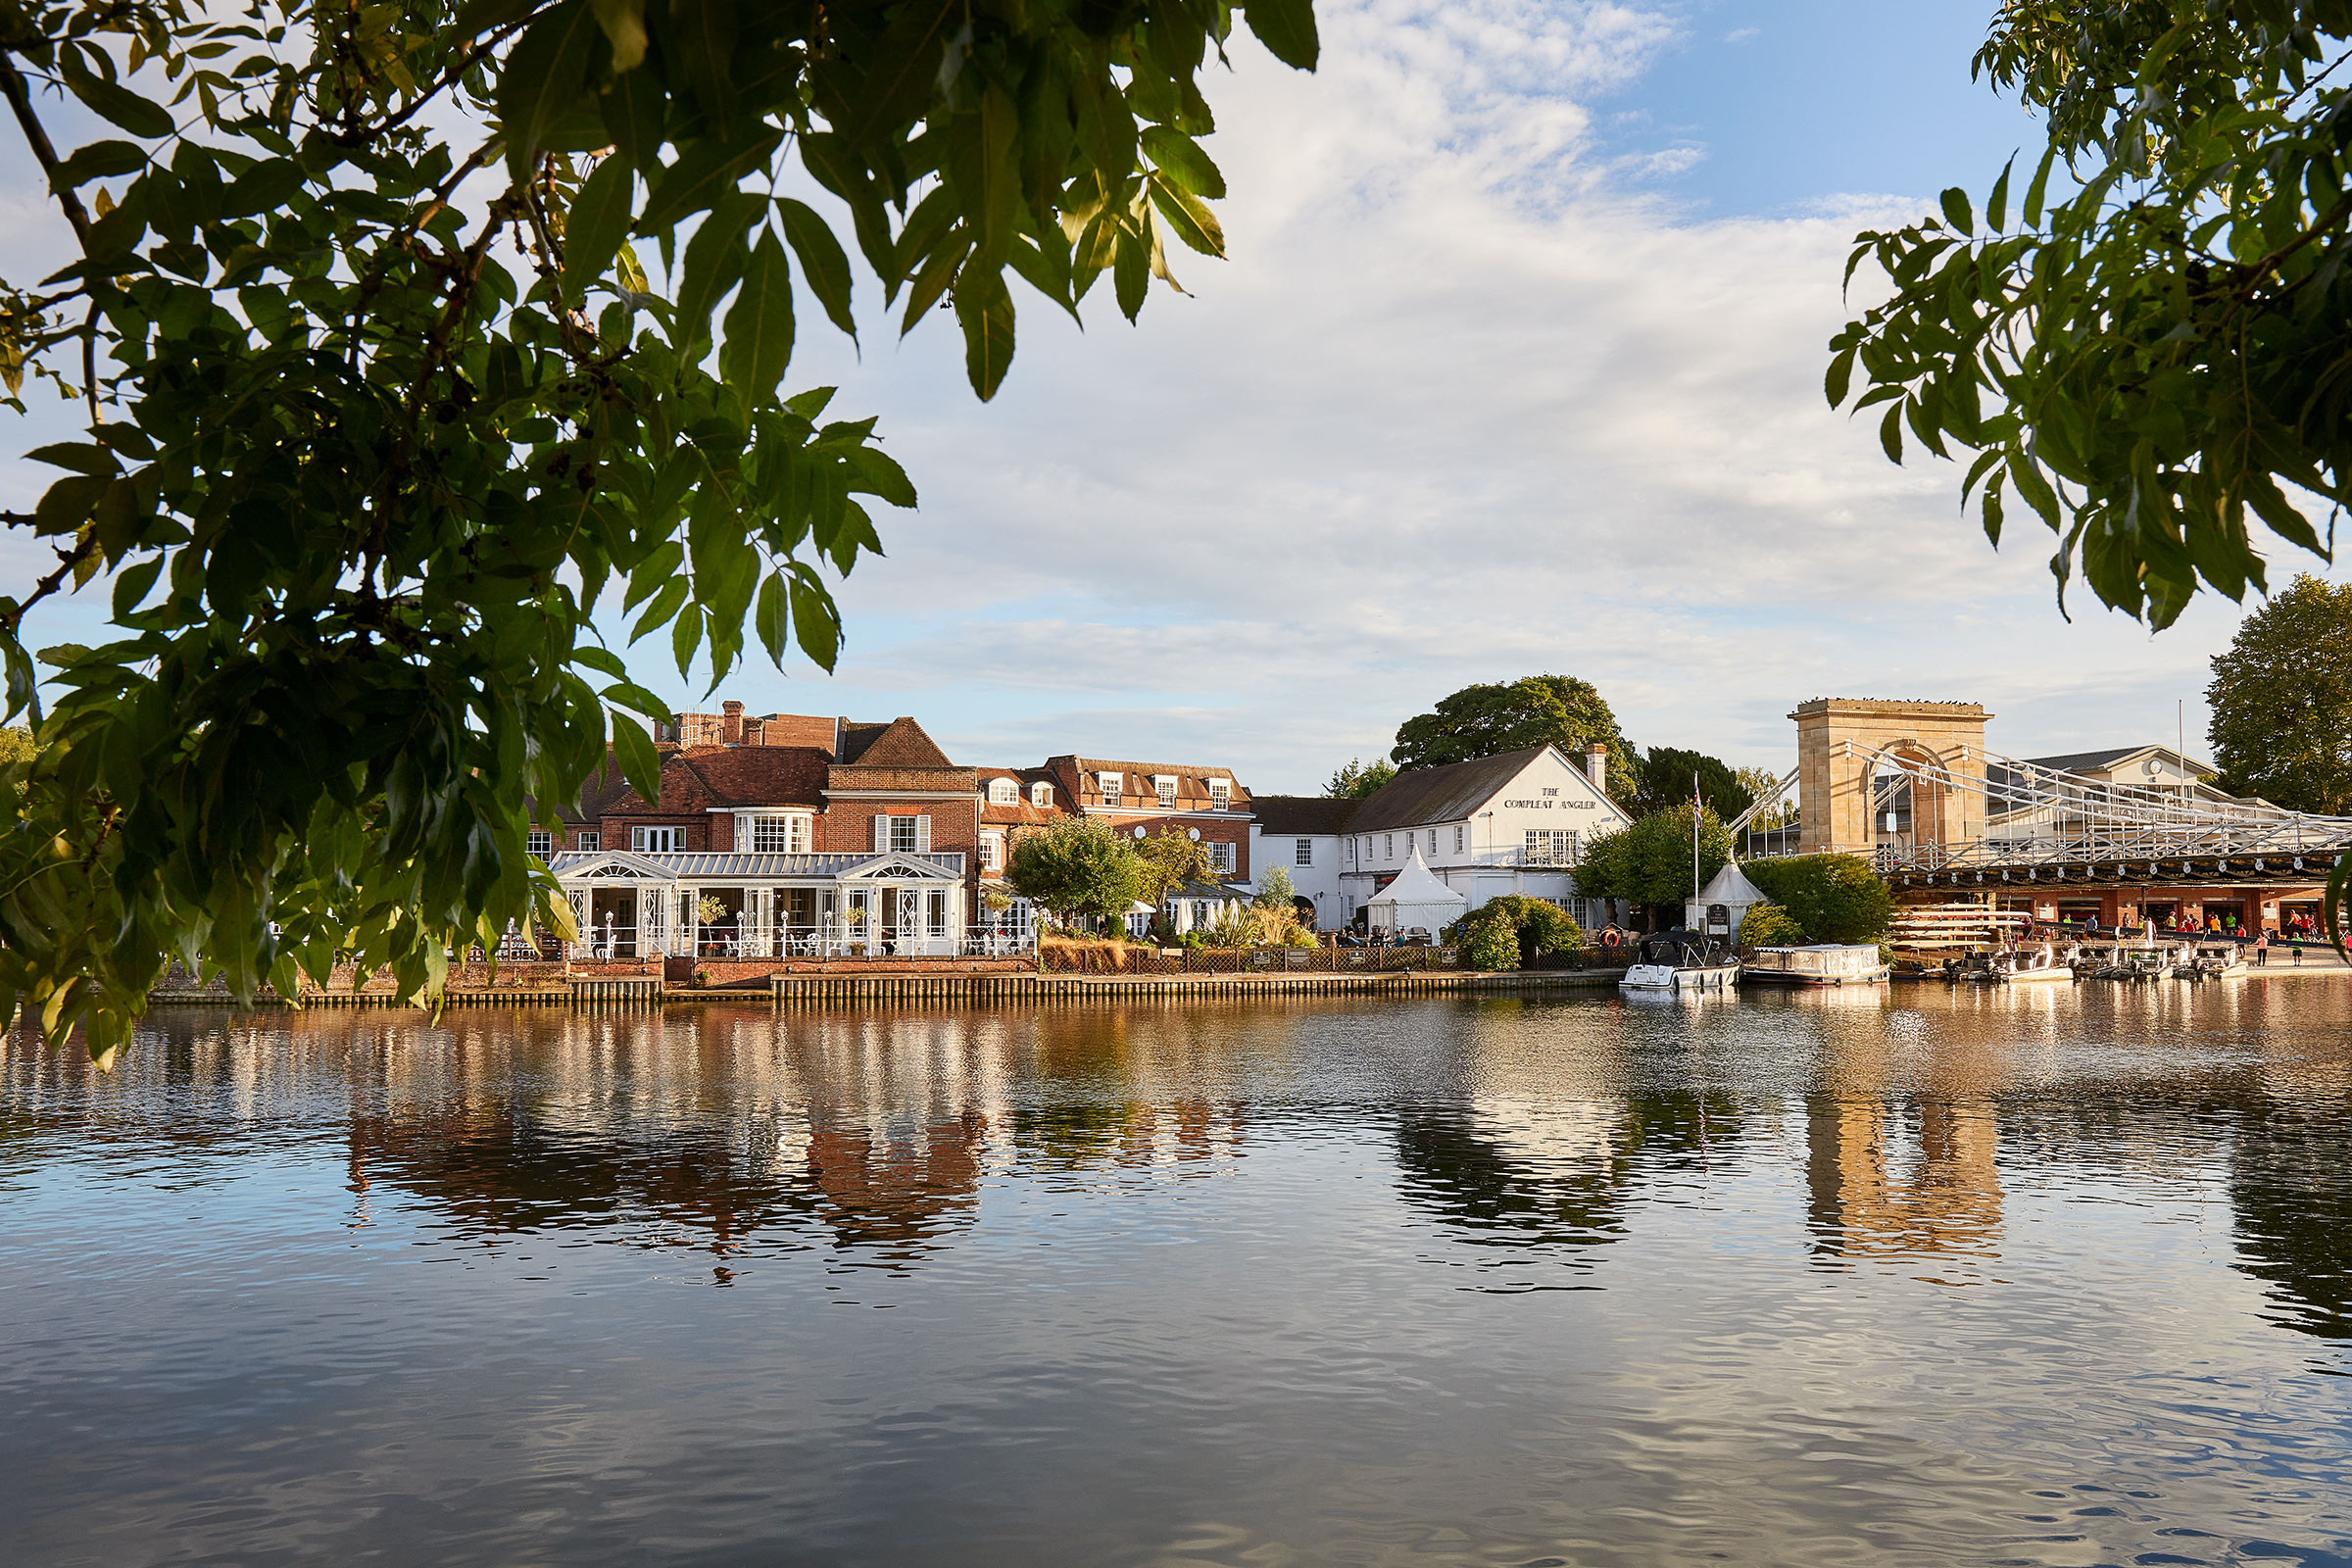 Summer exterior Compleat Angler, Marlow, travel and lifestyle photographer.